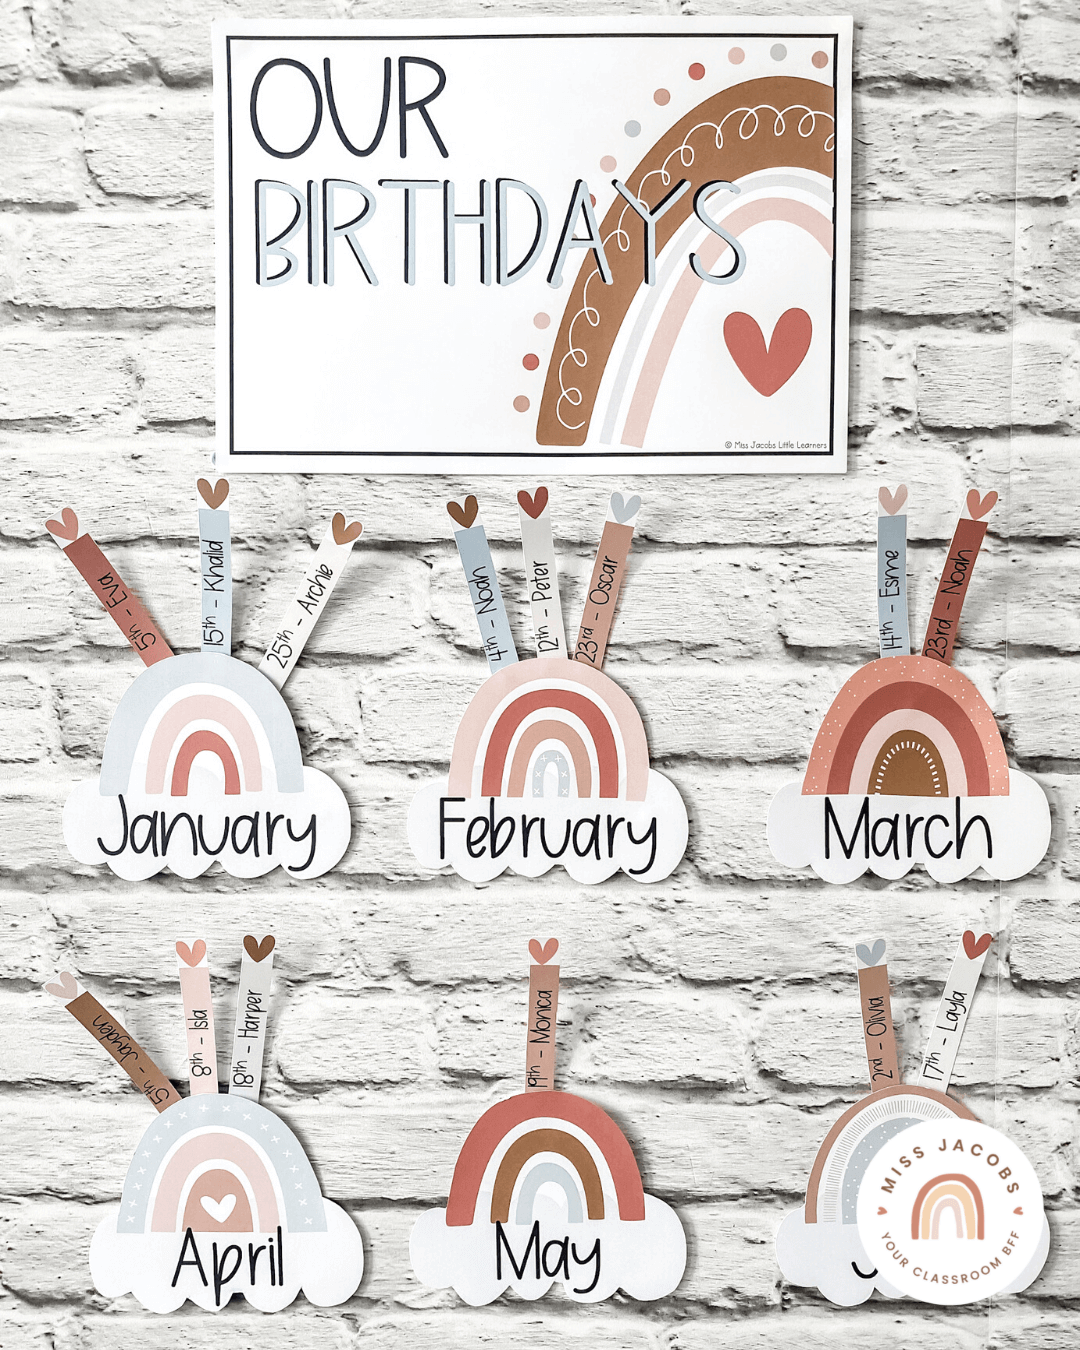 Two images show the Earthy Rainbow Birthday Display which consist of small rainbows with names that shoot out from the top like sunbeams. They’re stuck to a background that looks like painted white brick.” style=